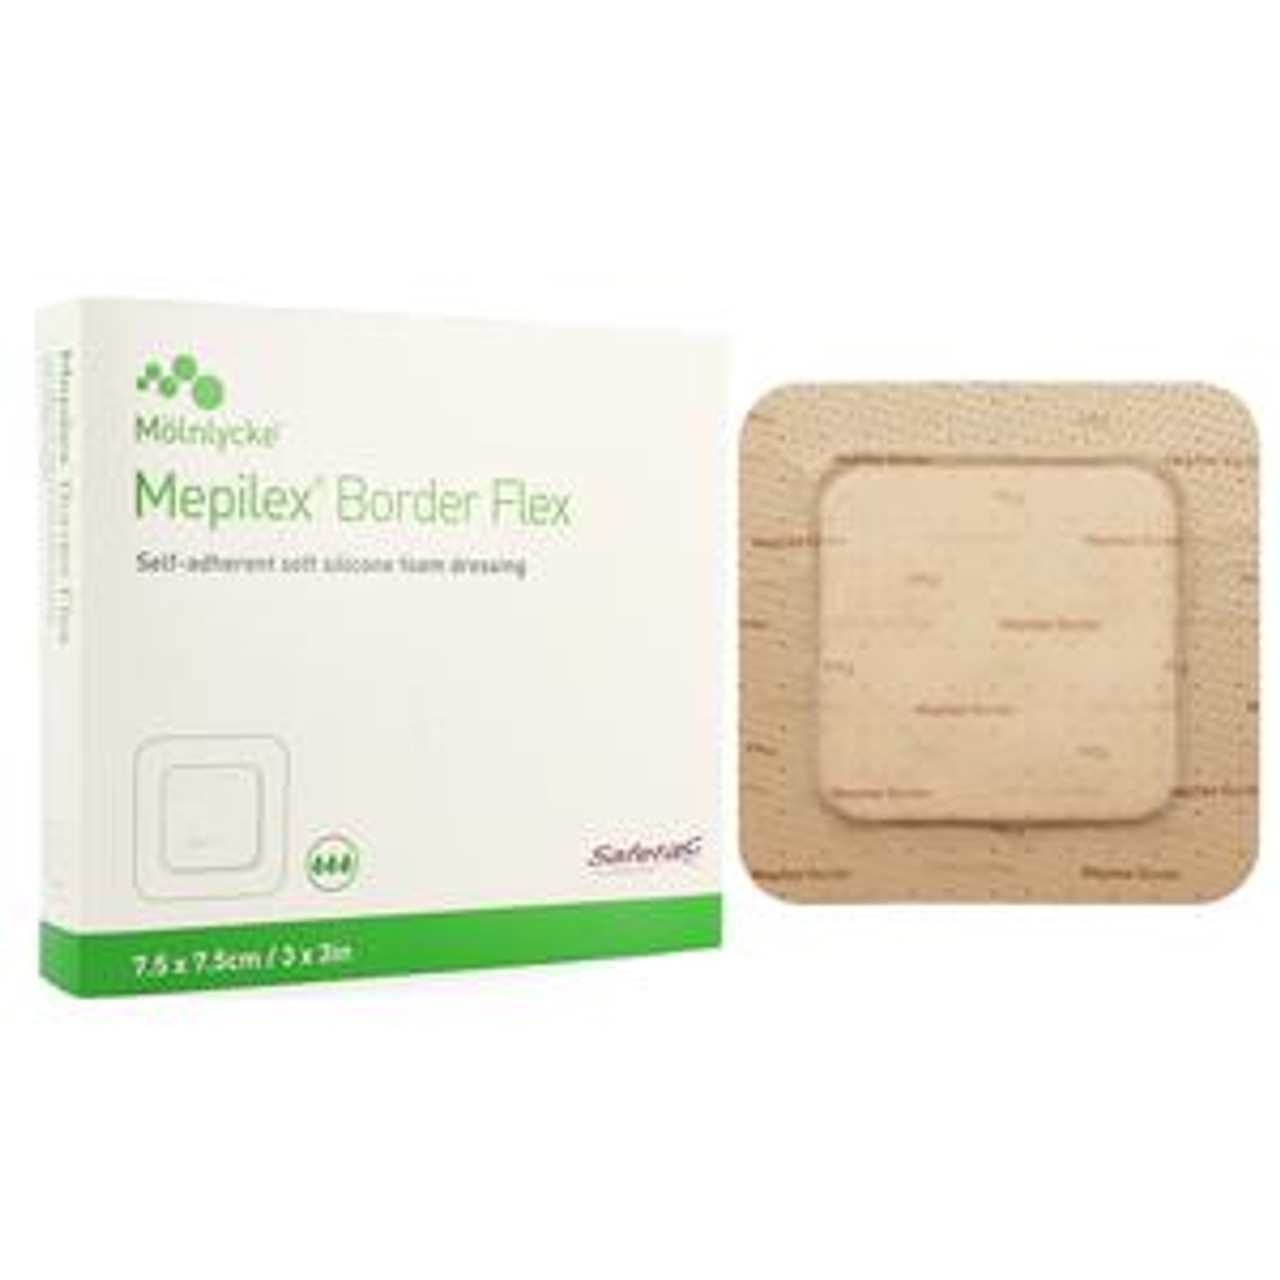 Mepilex Border Post-Op Ag all-in-one silver post-op dressing